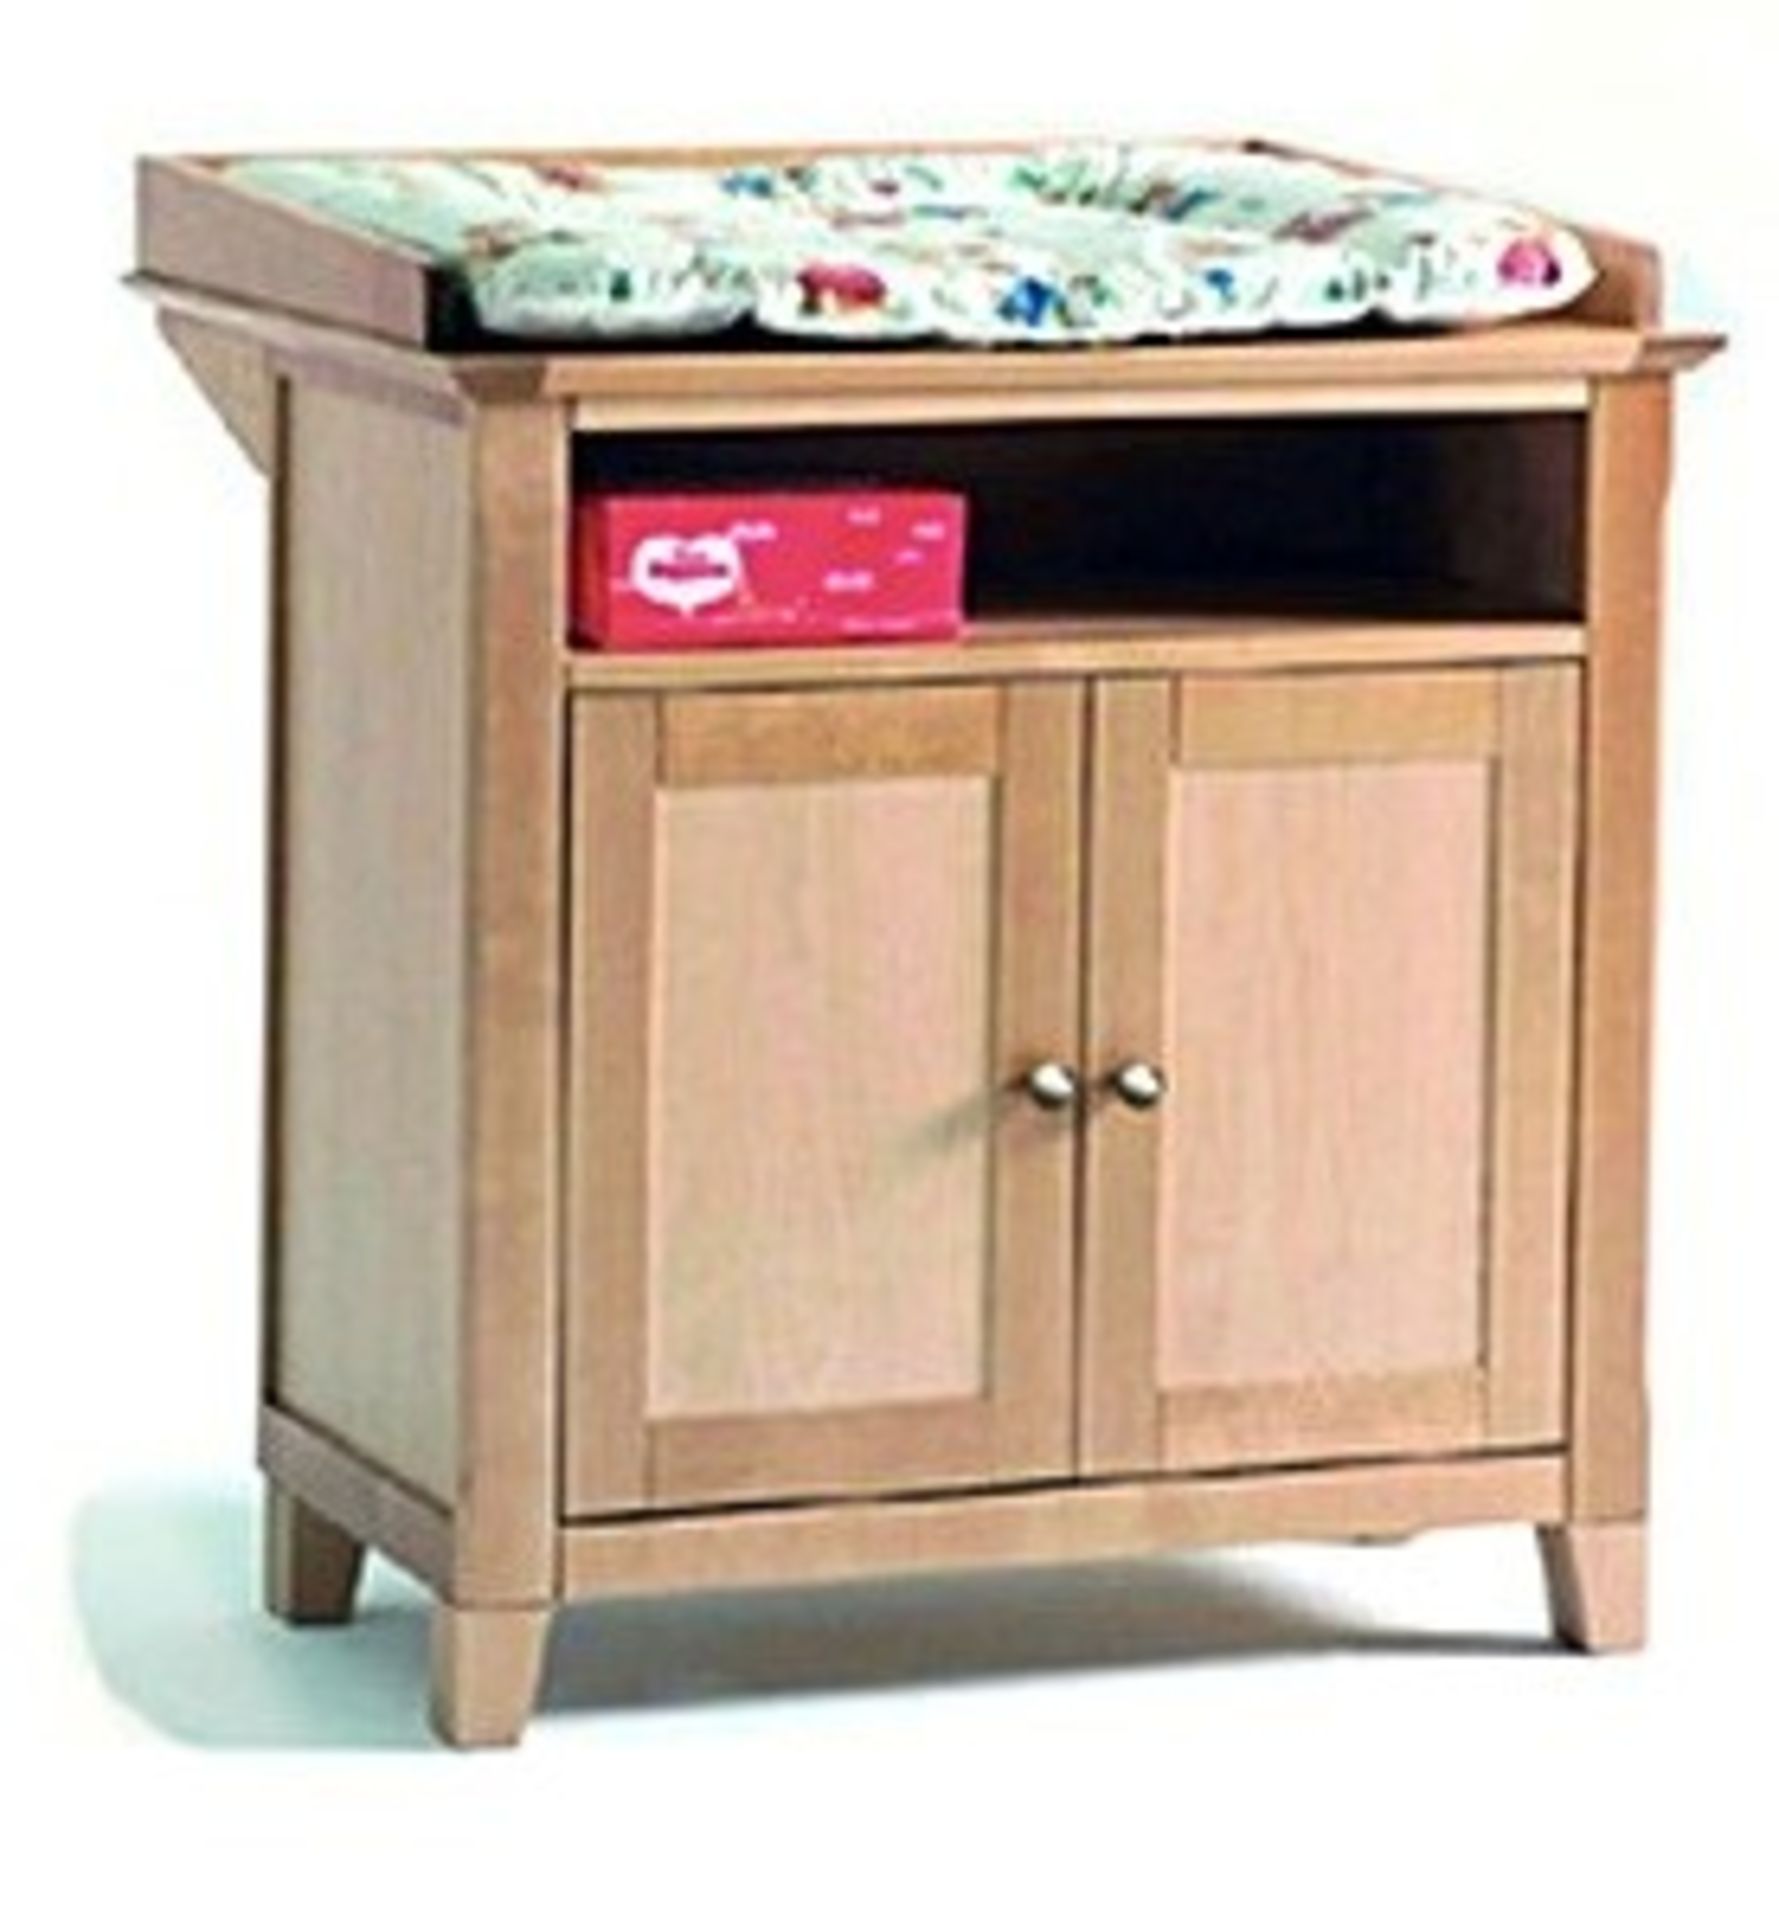 1 x Vienna Solid Wood Nursery Furniture Set - Birch - Includes Baby Changing Unit & Cot Brand - Image 2 of 3